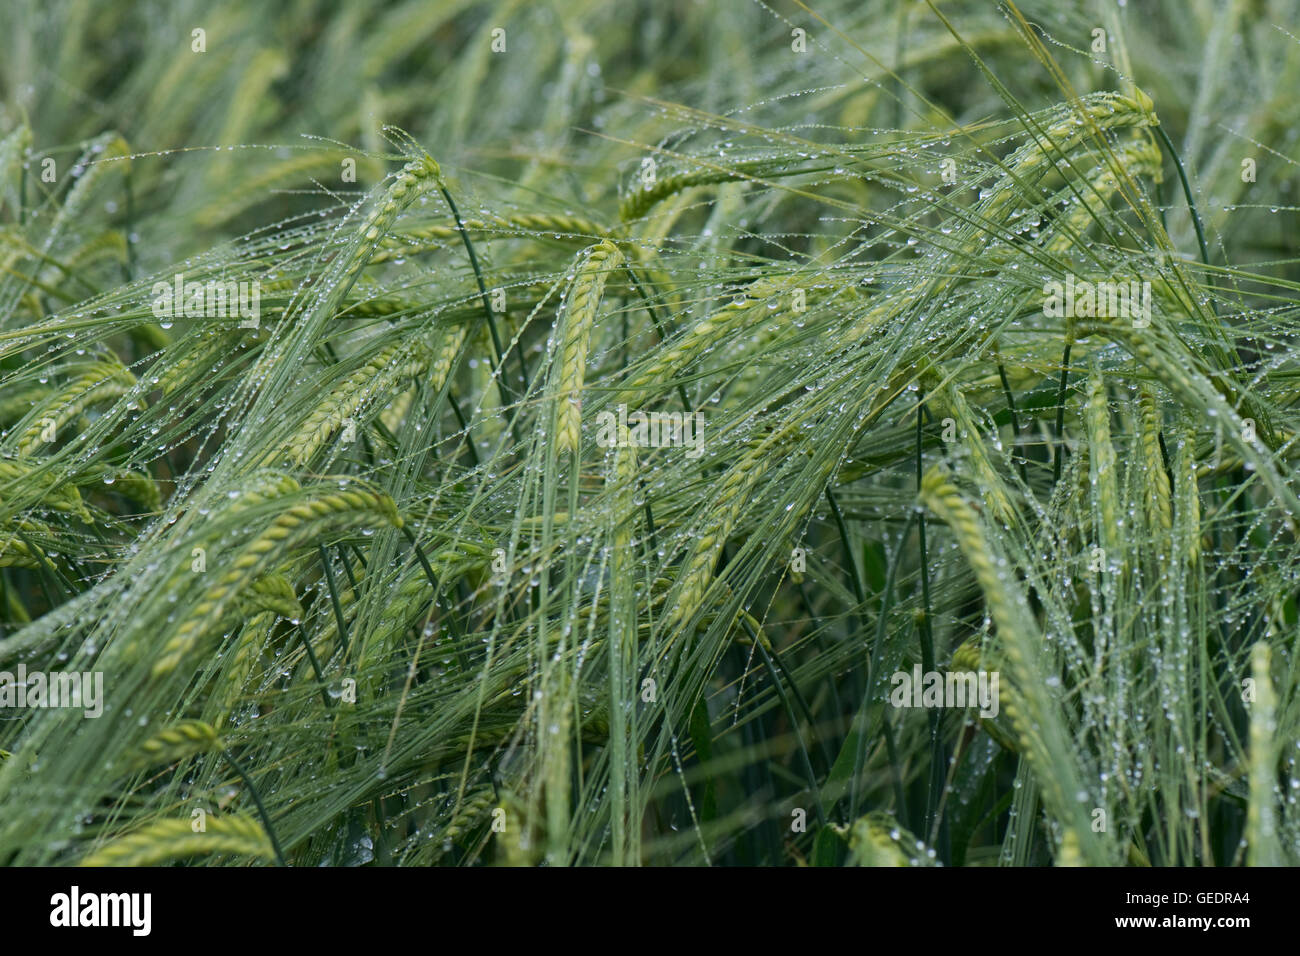 Ears of a green, unripe barley crop after rain with discreet water droplets on the awns, Hampshire, June Stock Photo